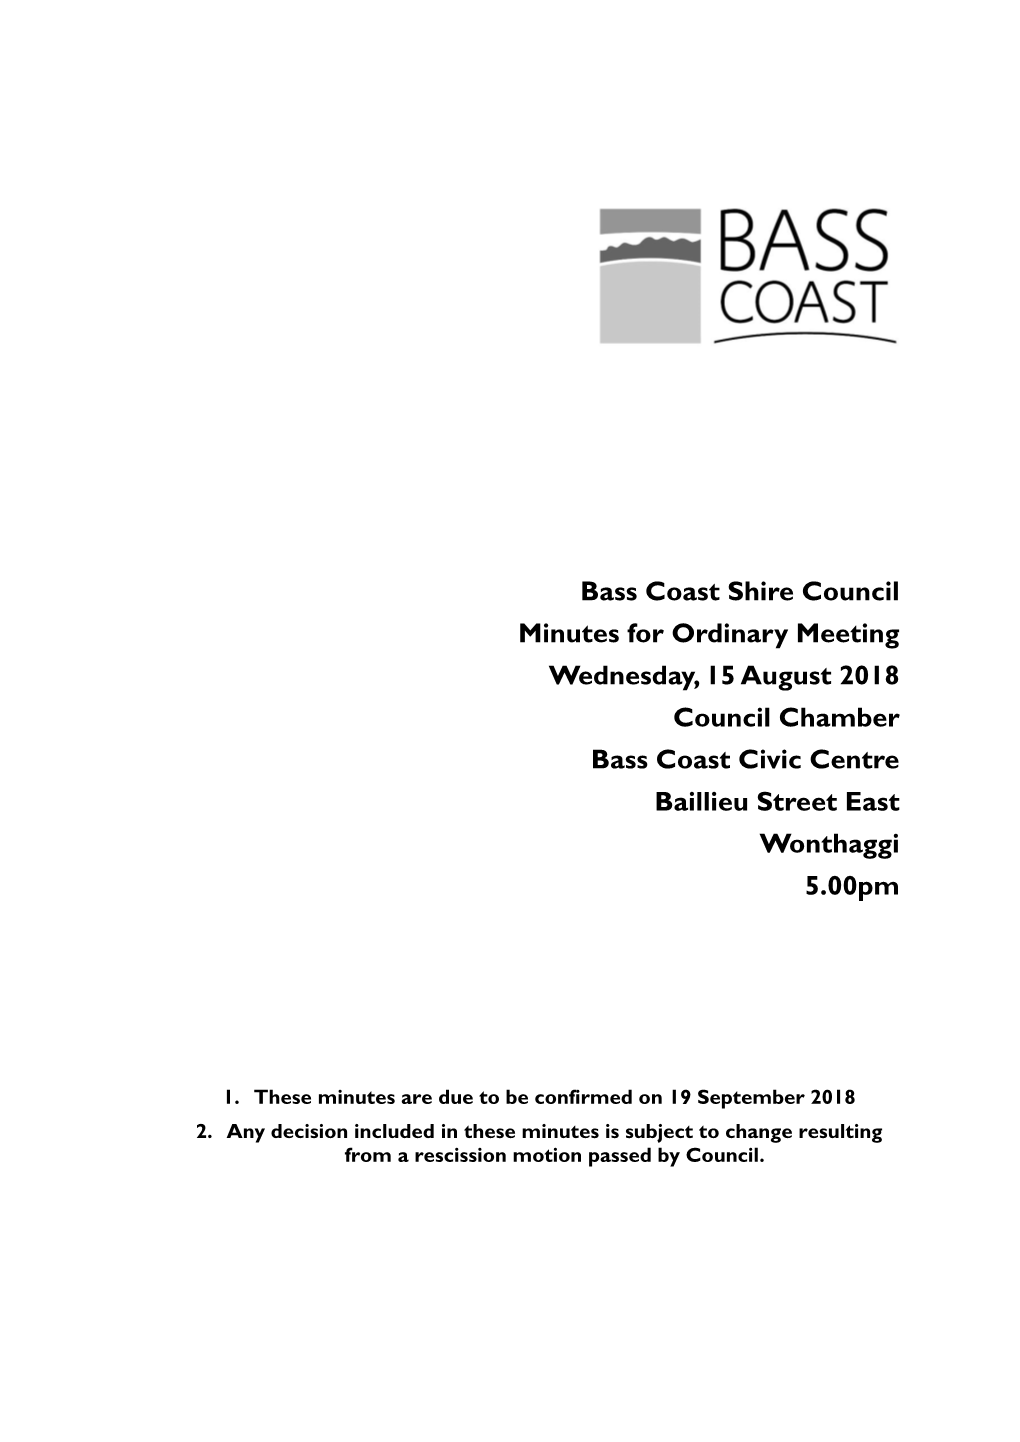 Minutes of Ordinary Meeting - 15 August 2018 Bass Coast Shire Council